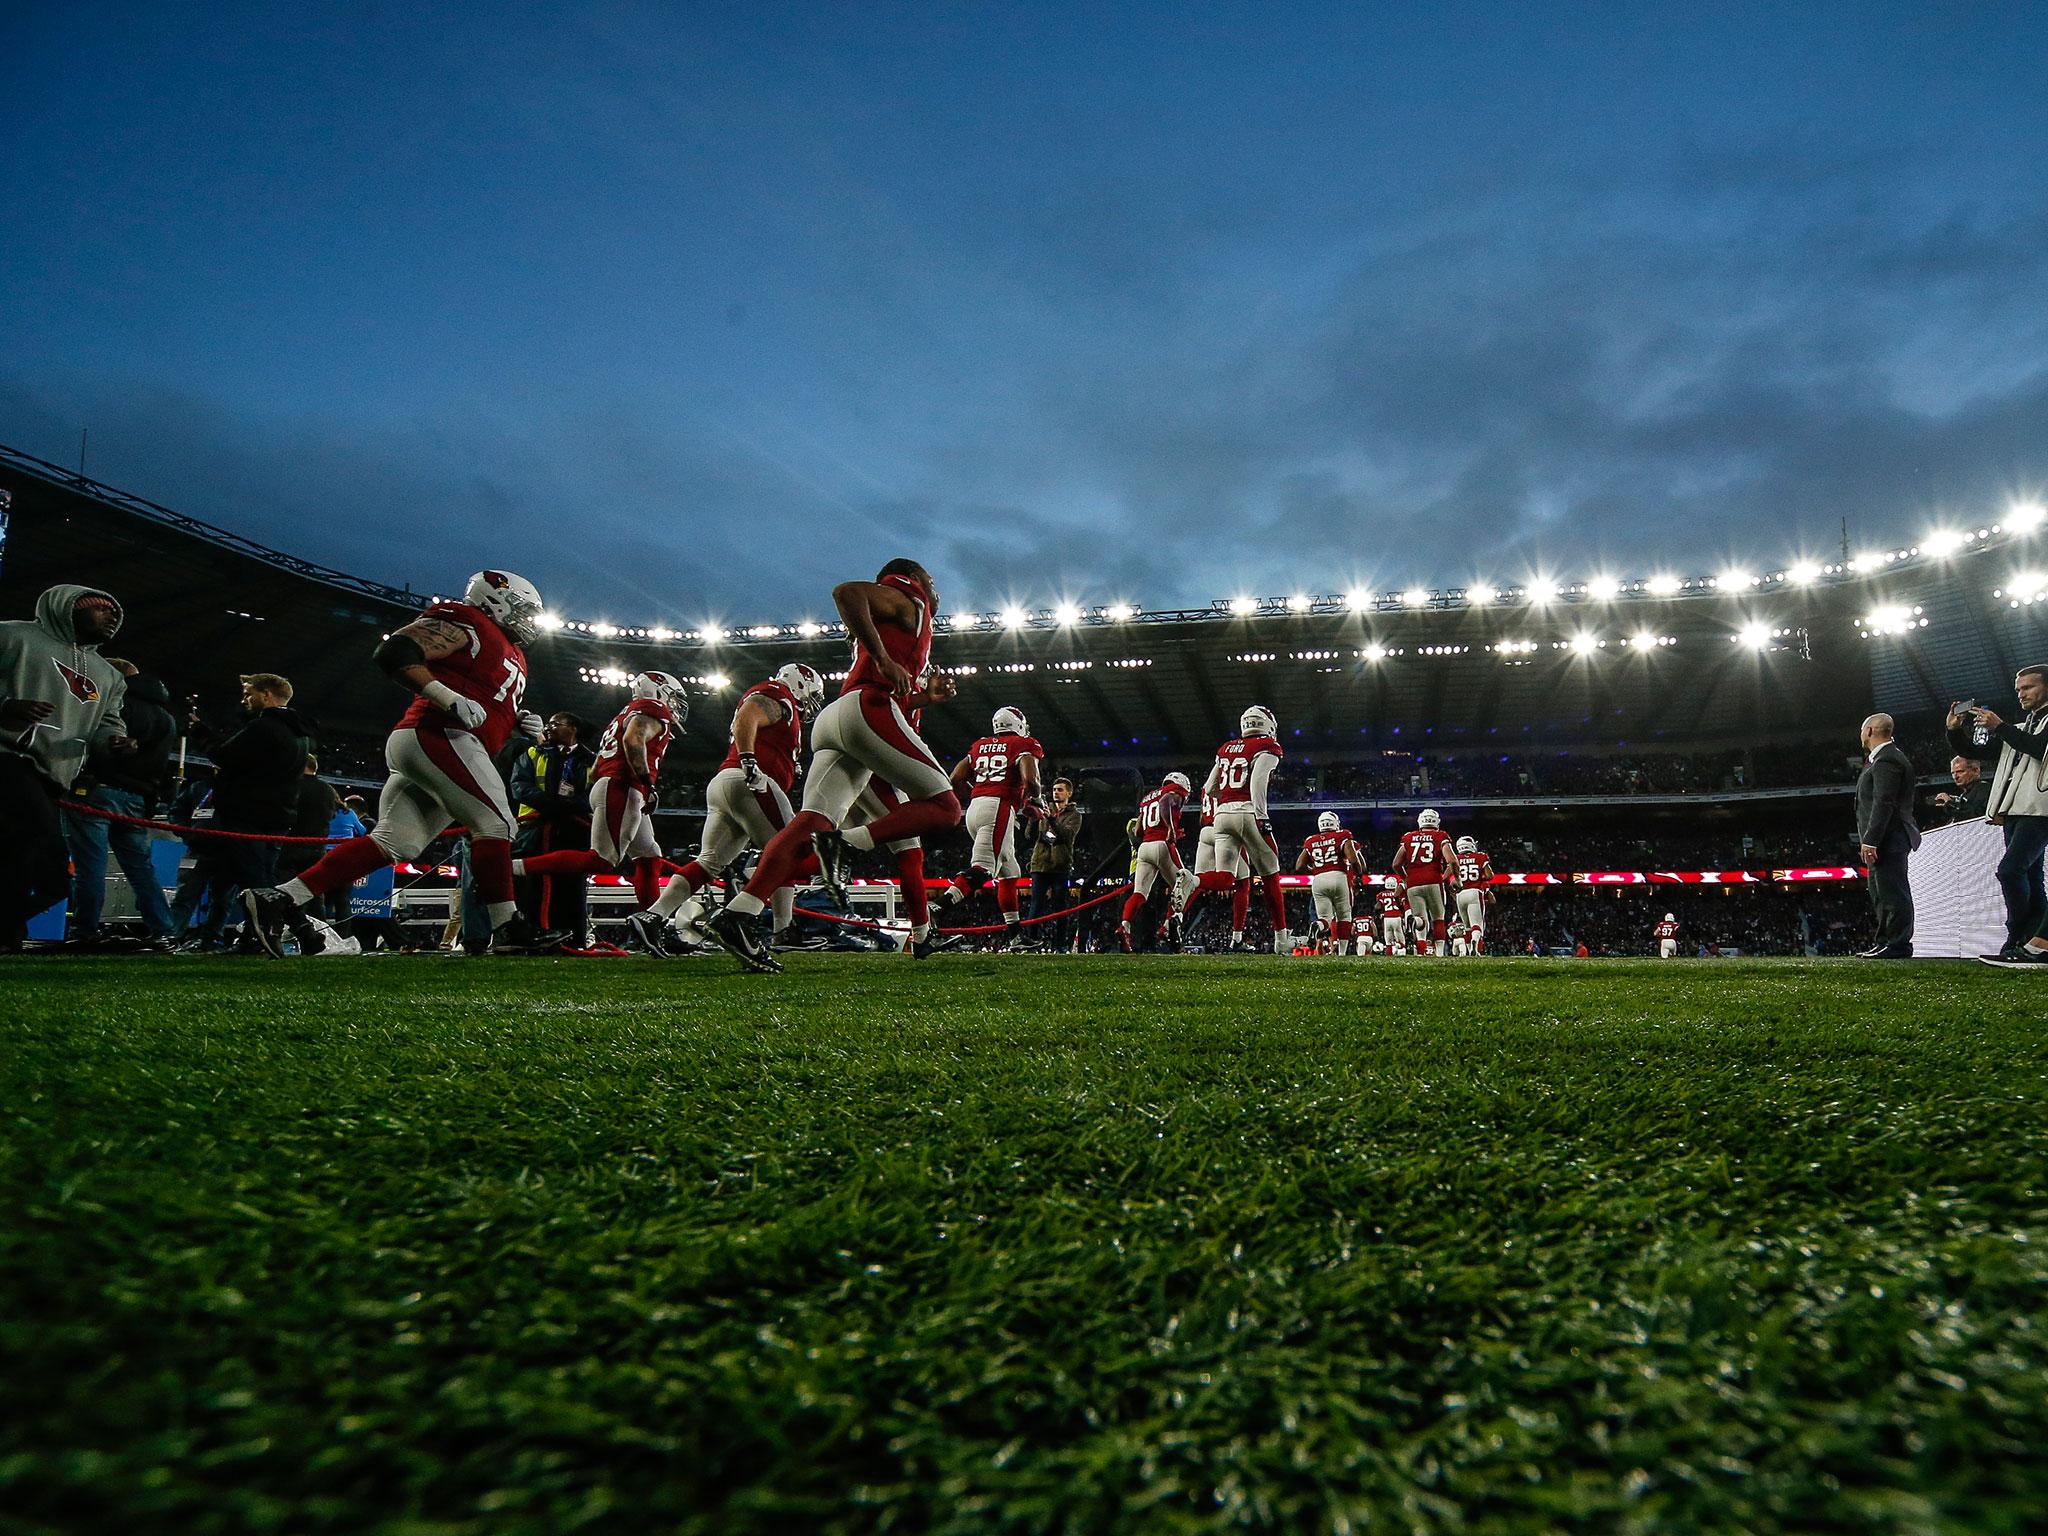 London was once again home to an NFL clash over the weekend